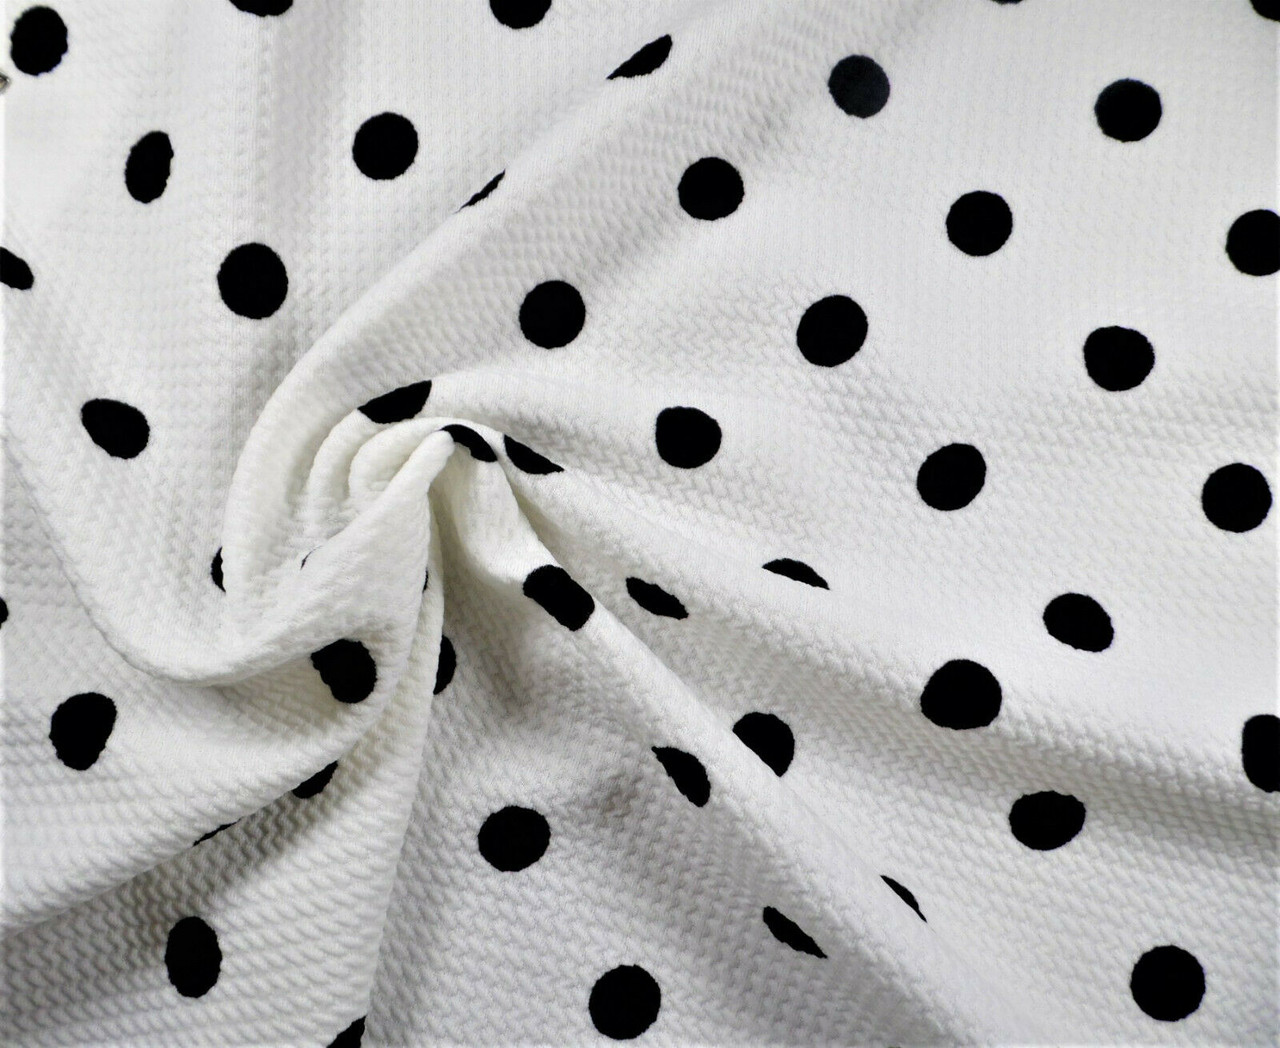 Bullet Printed Liverpool Textured Fabric Stretch Ivory Black Polka Dot P31